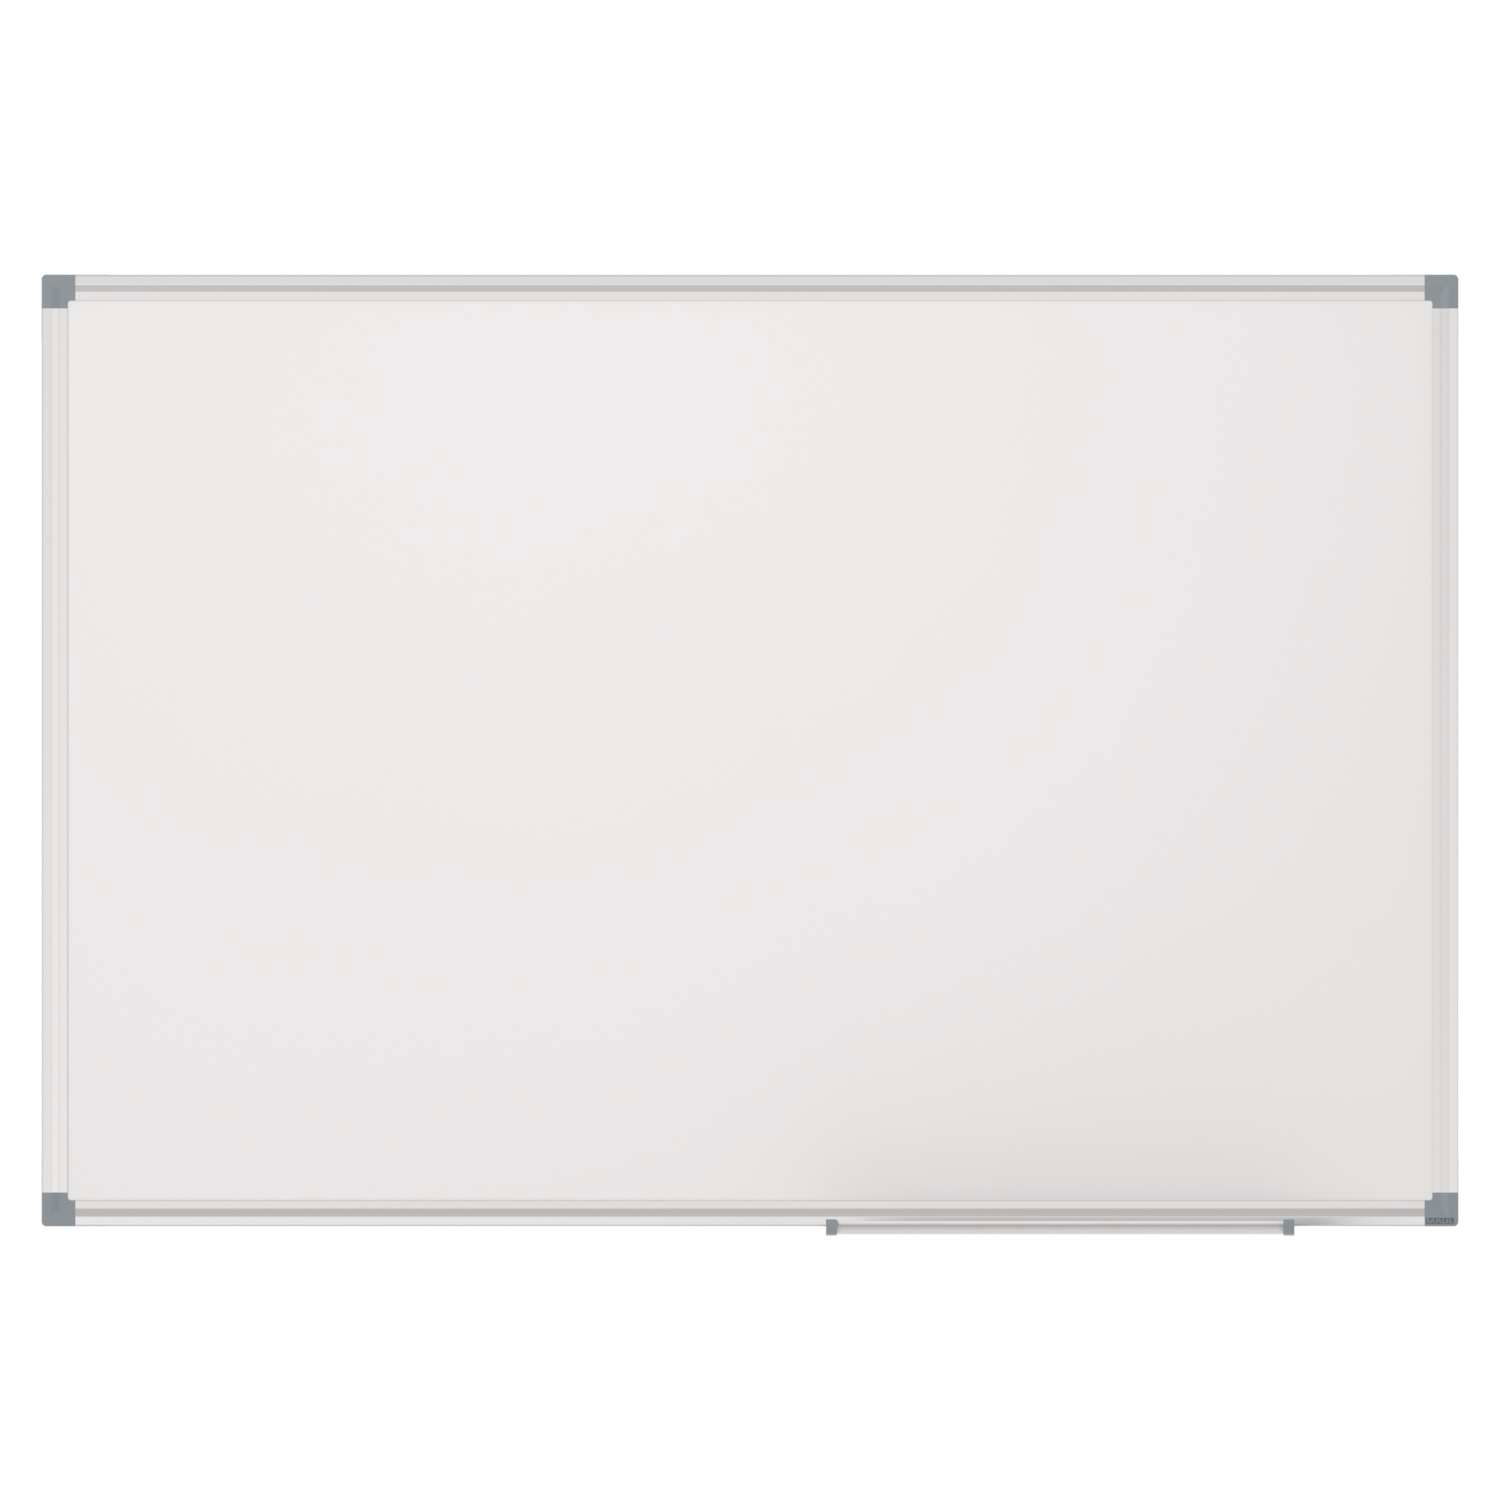 Whiteboard MAULstandard, Emaille, 120x150 cm